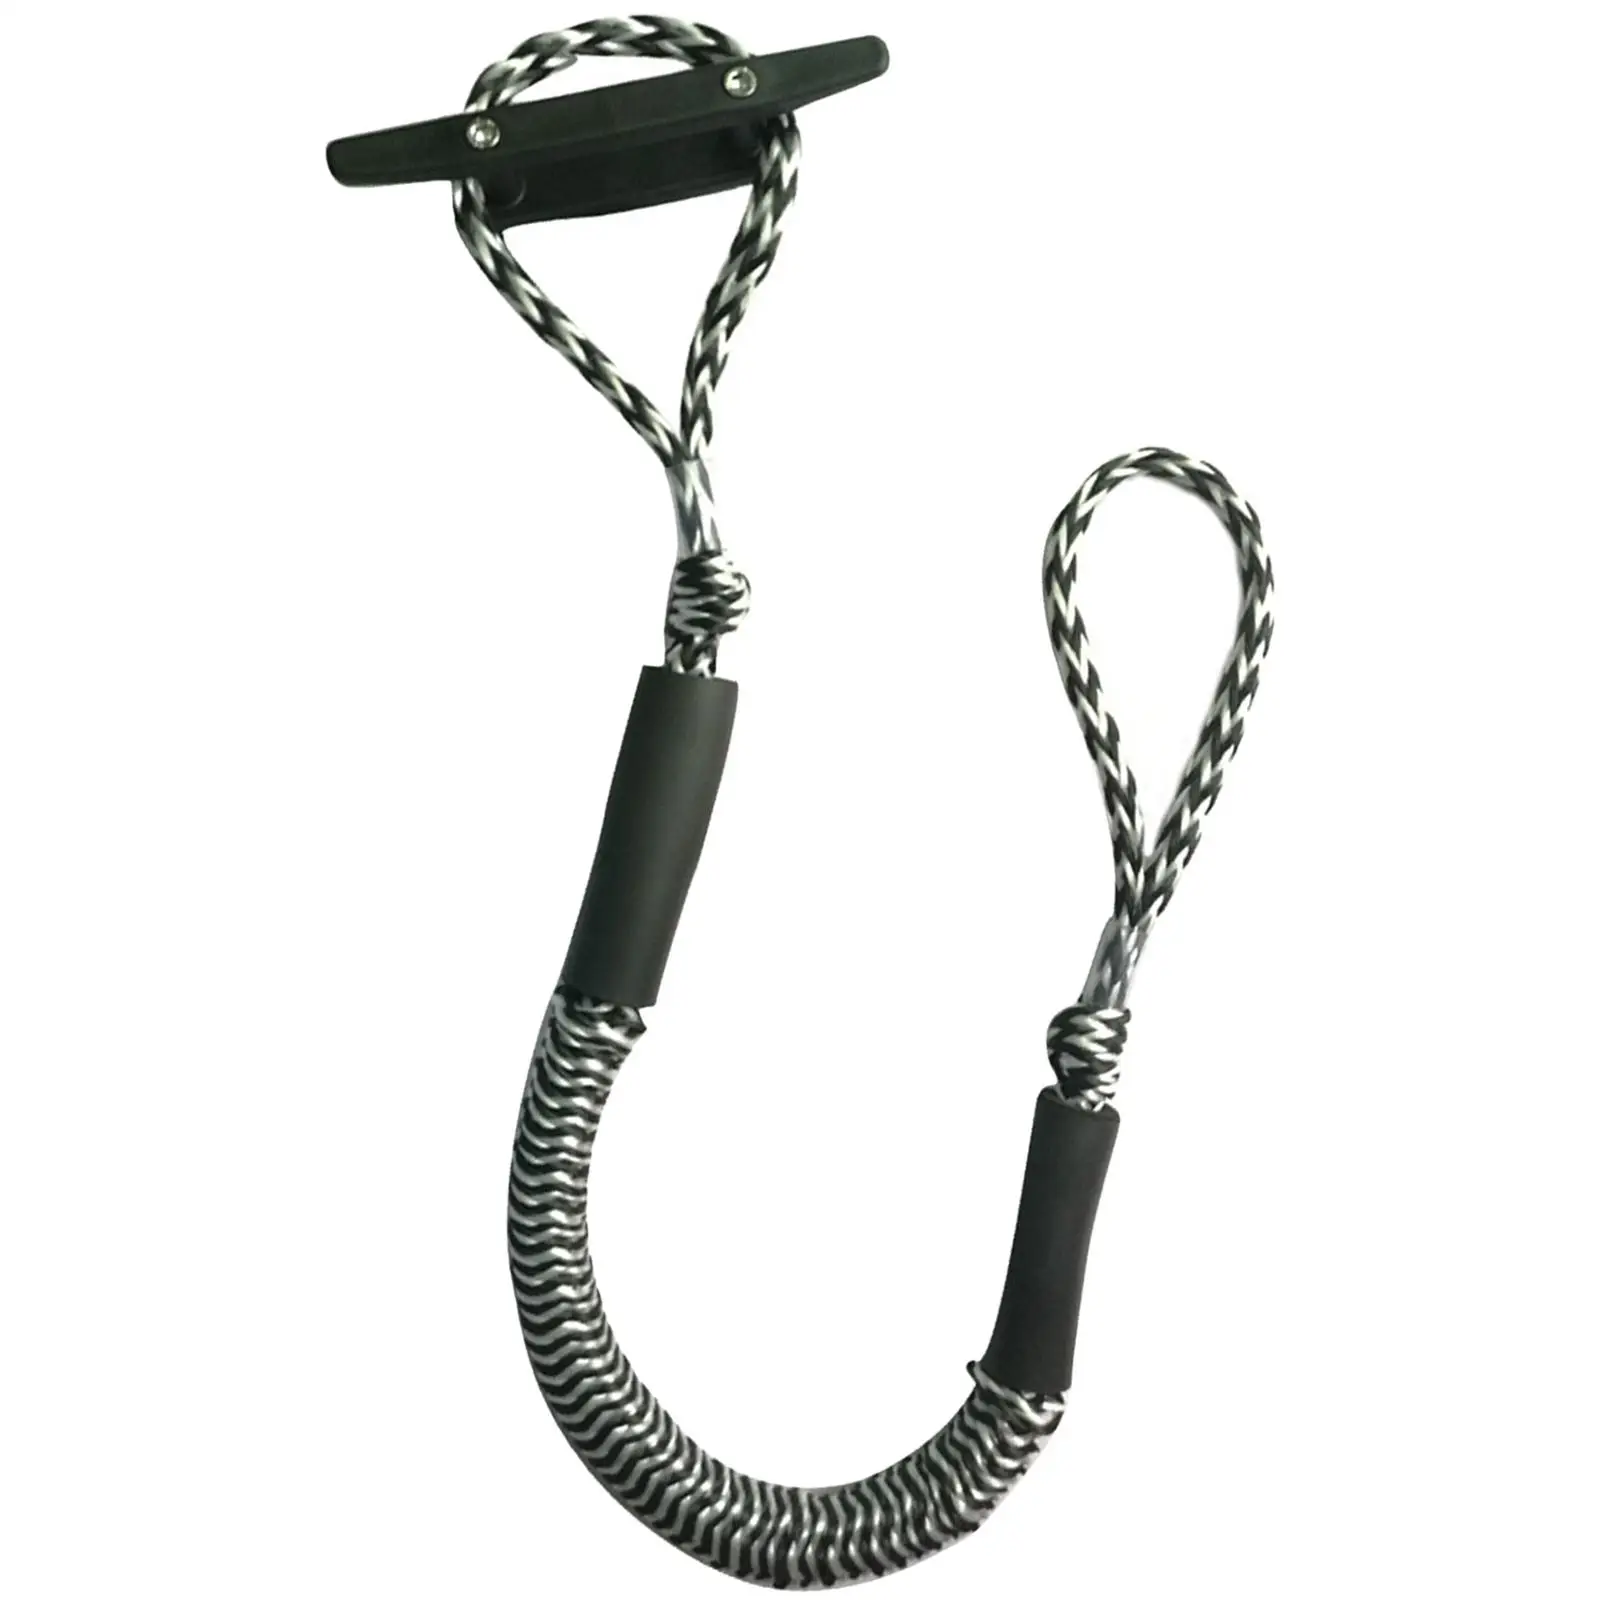 Bungee Dock Line Bungee Docking Rope 4FT Rope Stretchable Mooring Rope Foam Float Fishing Boats Kayak Accessories